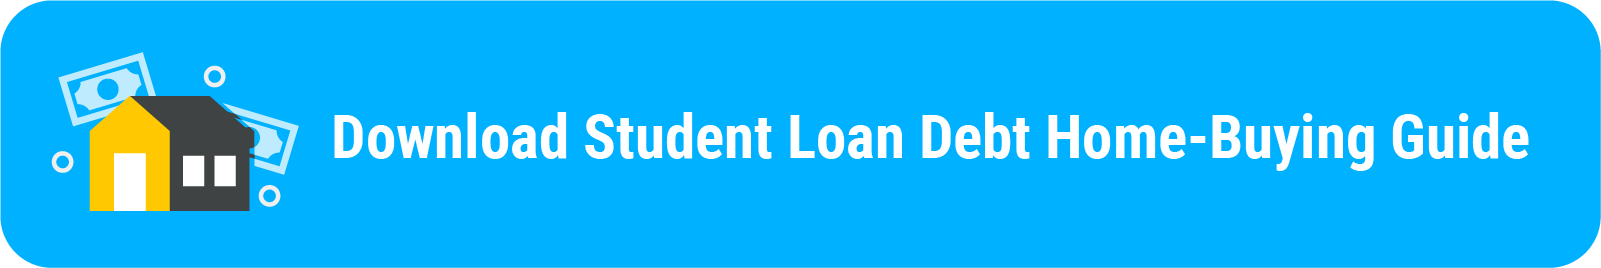 download the guide to buying a house with student loan debt